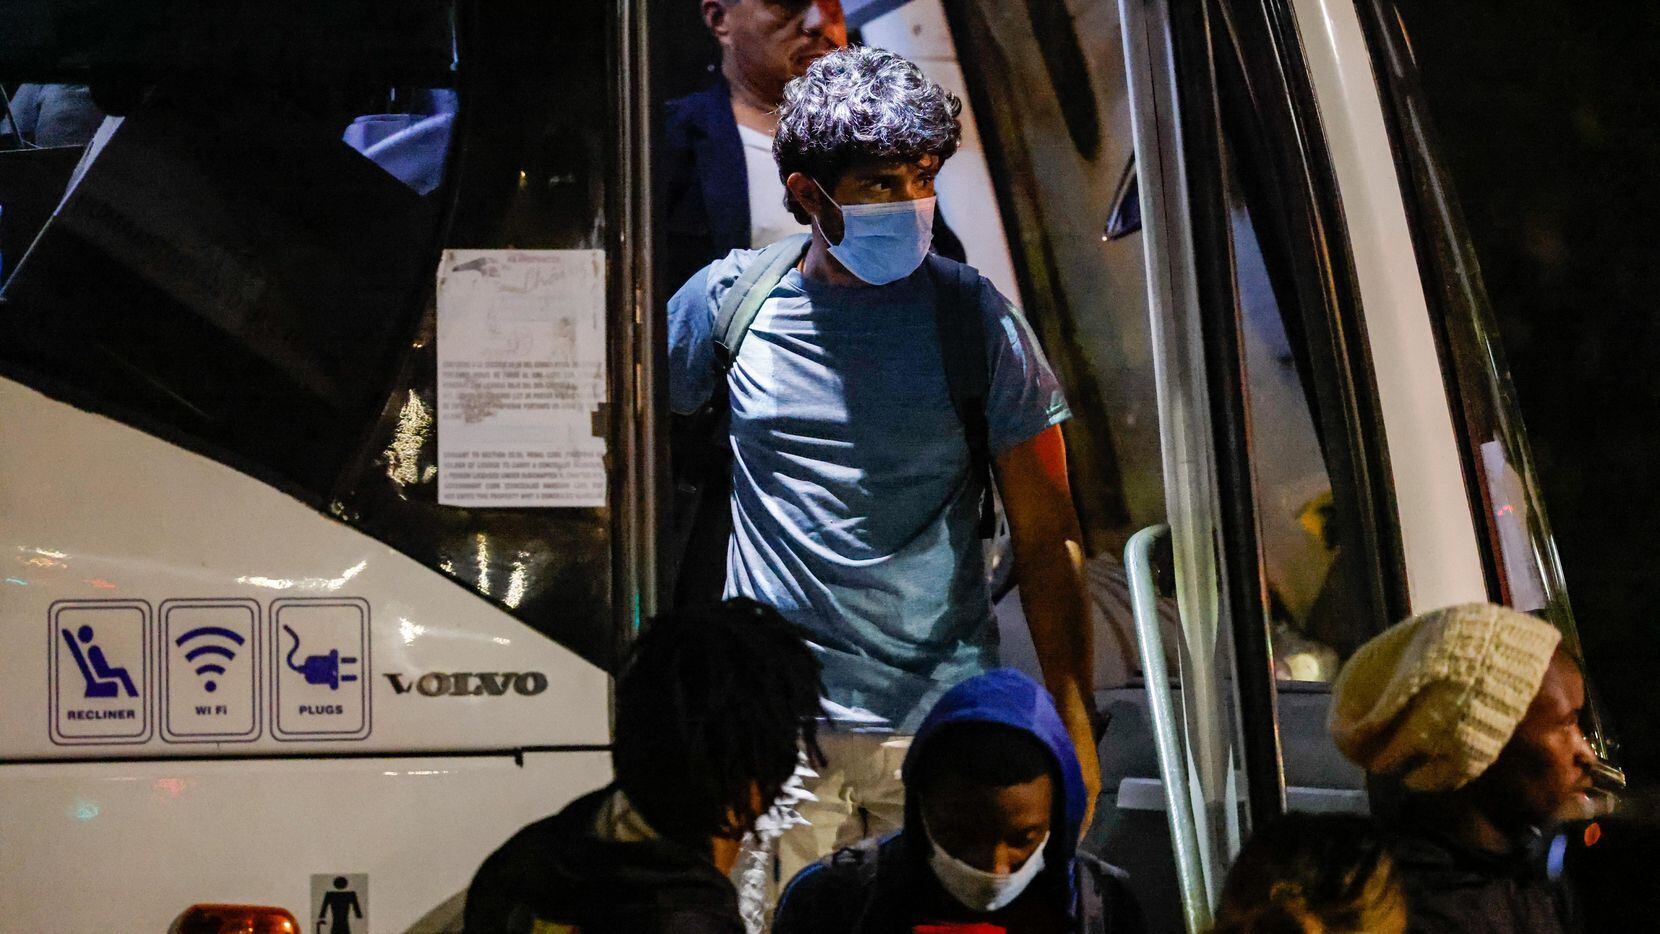 Victor Rodriguez, 26, disembarks the bus that took him along with a group of migrants from...